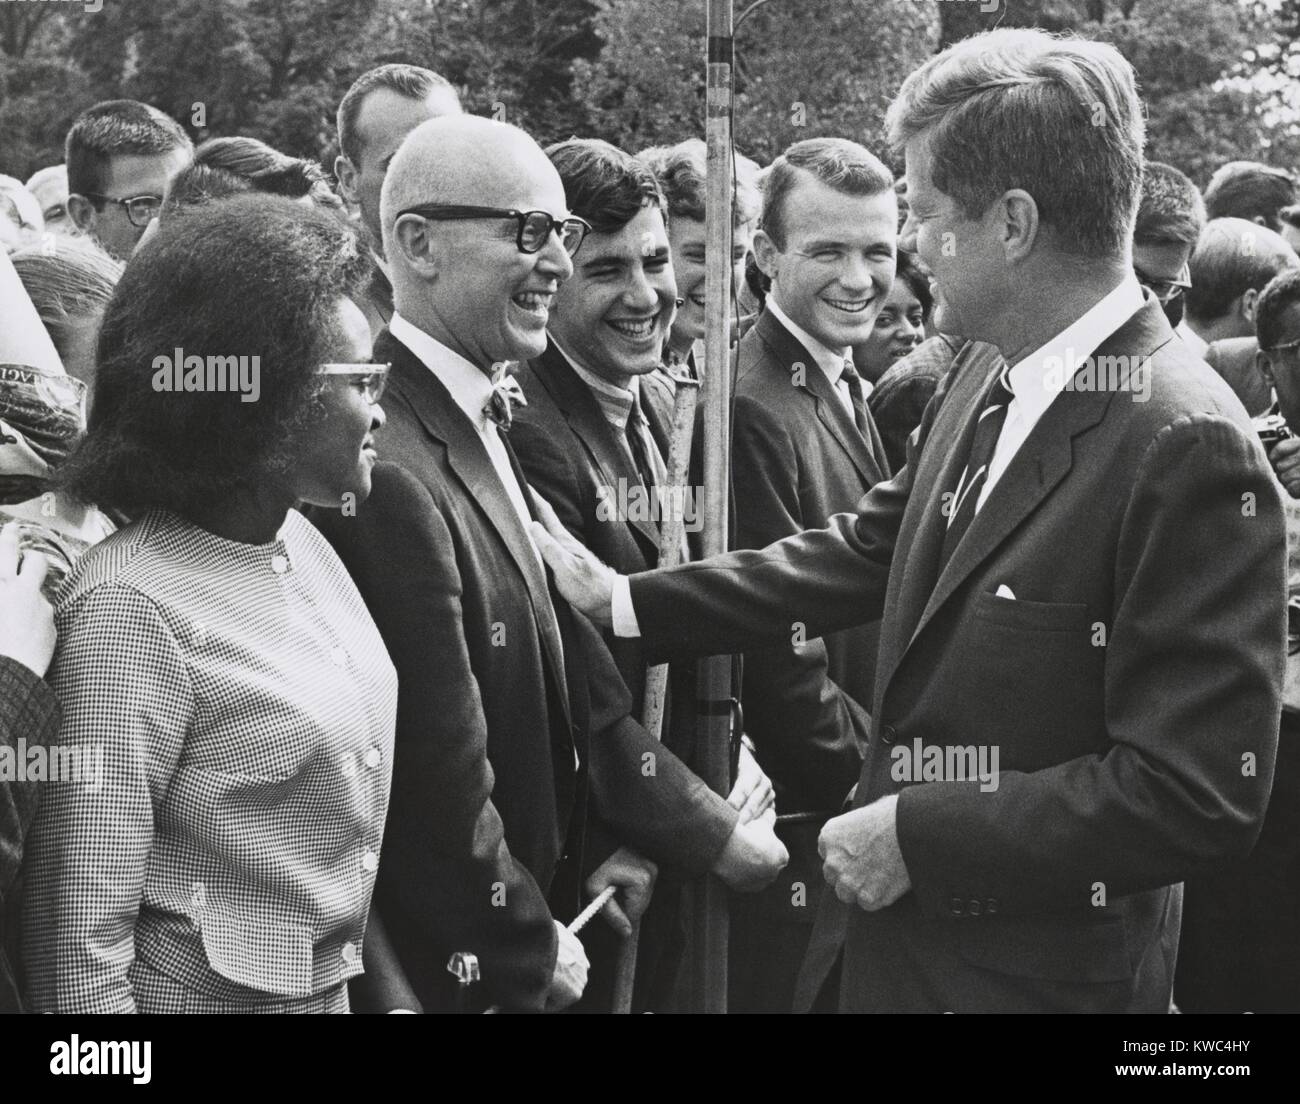 President John Kennedy meets with one of the first groups of Peace Corps volunteers. White House lawn, Aug. 21, 1961. (BSLOC 2015 2 225) Stock Photo